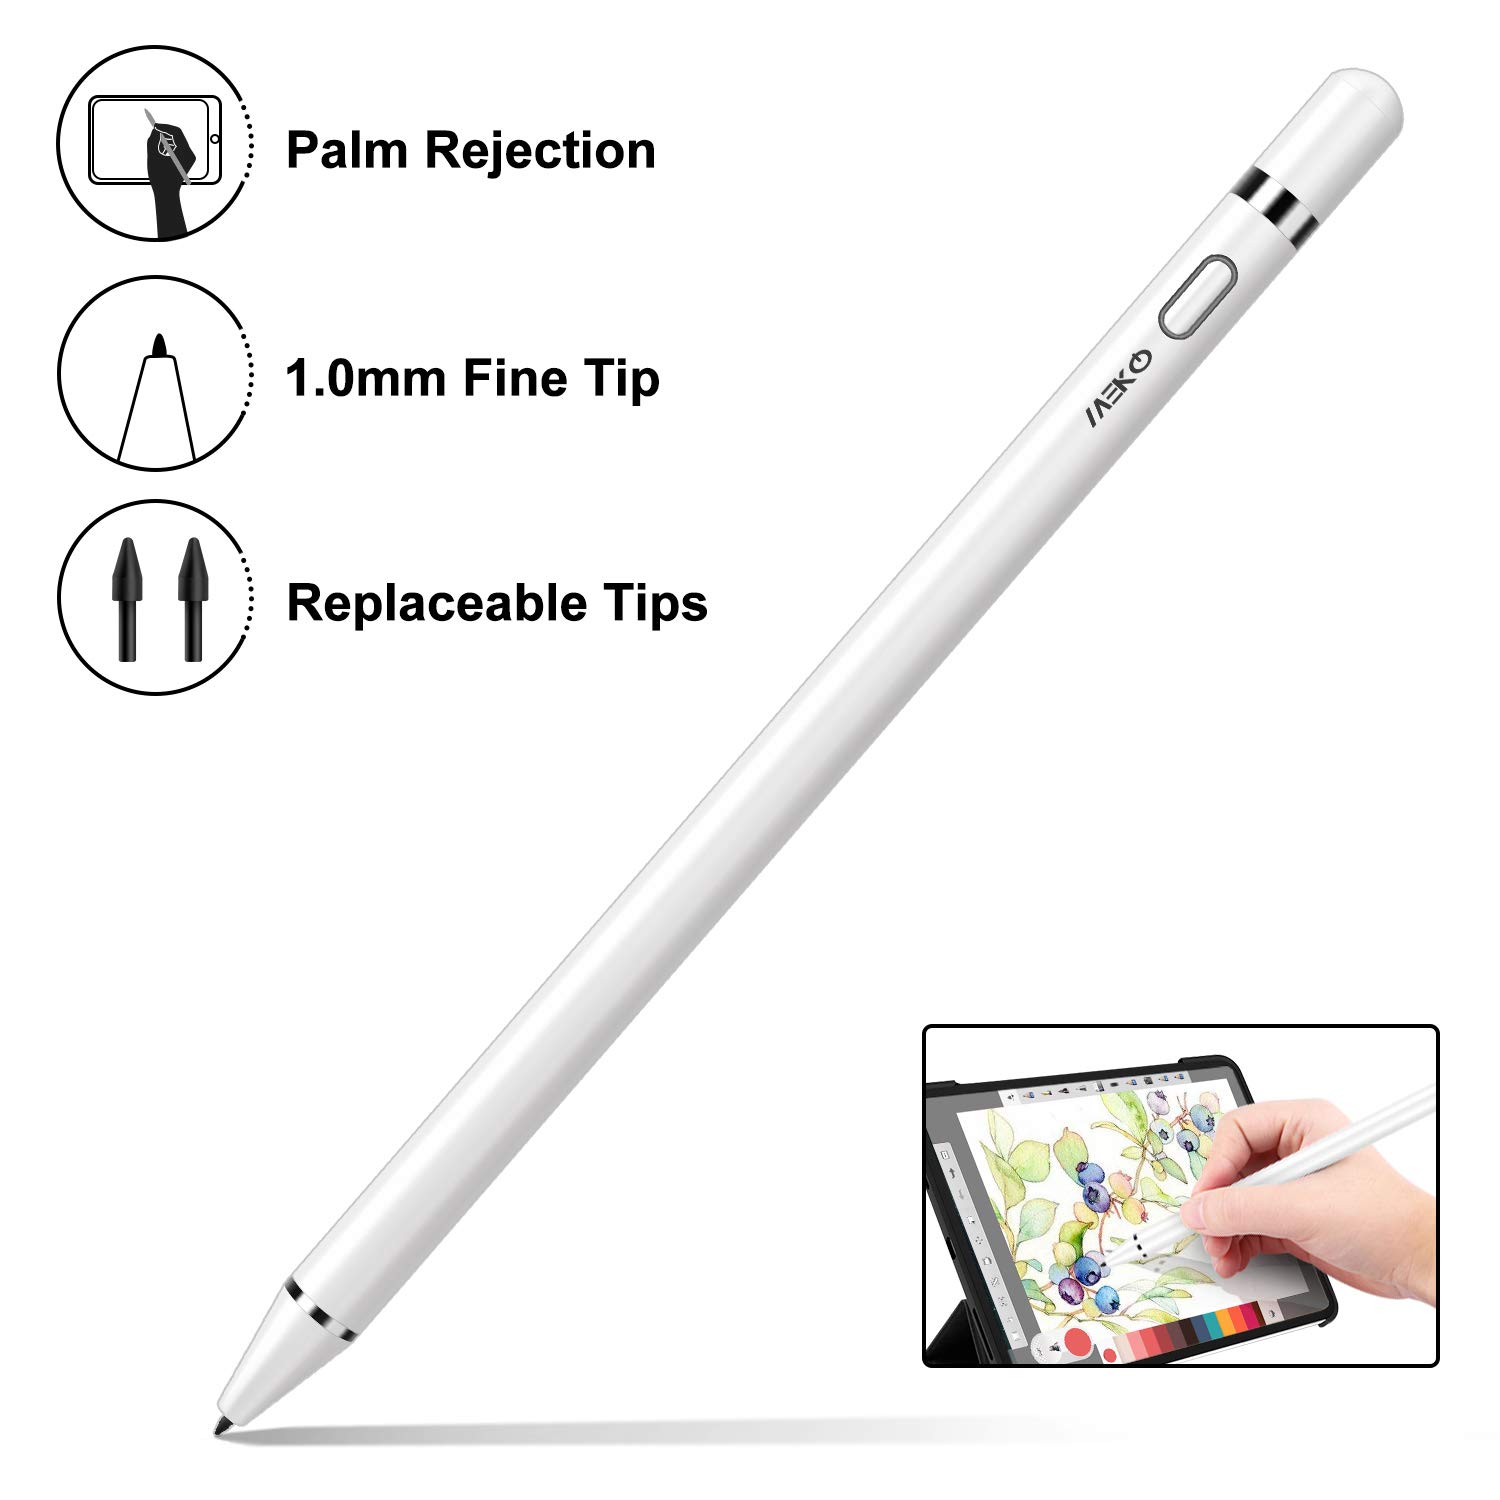 Colorful and stylish stylus for coloring pages